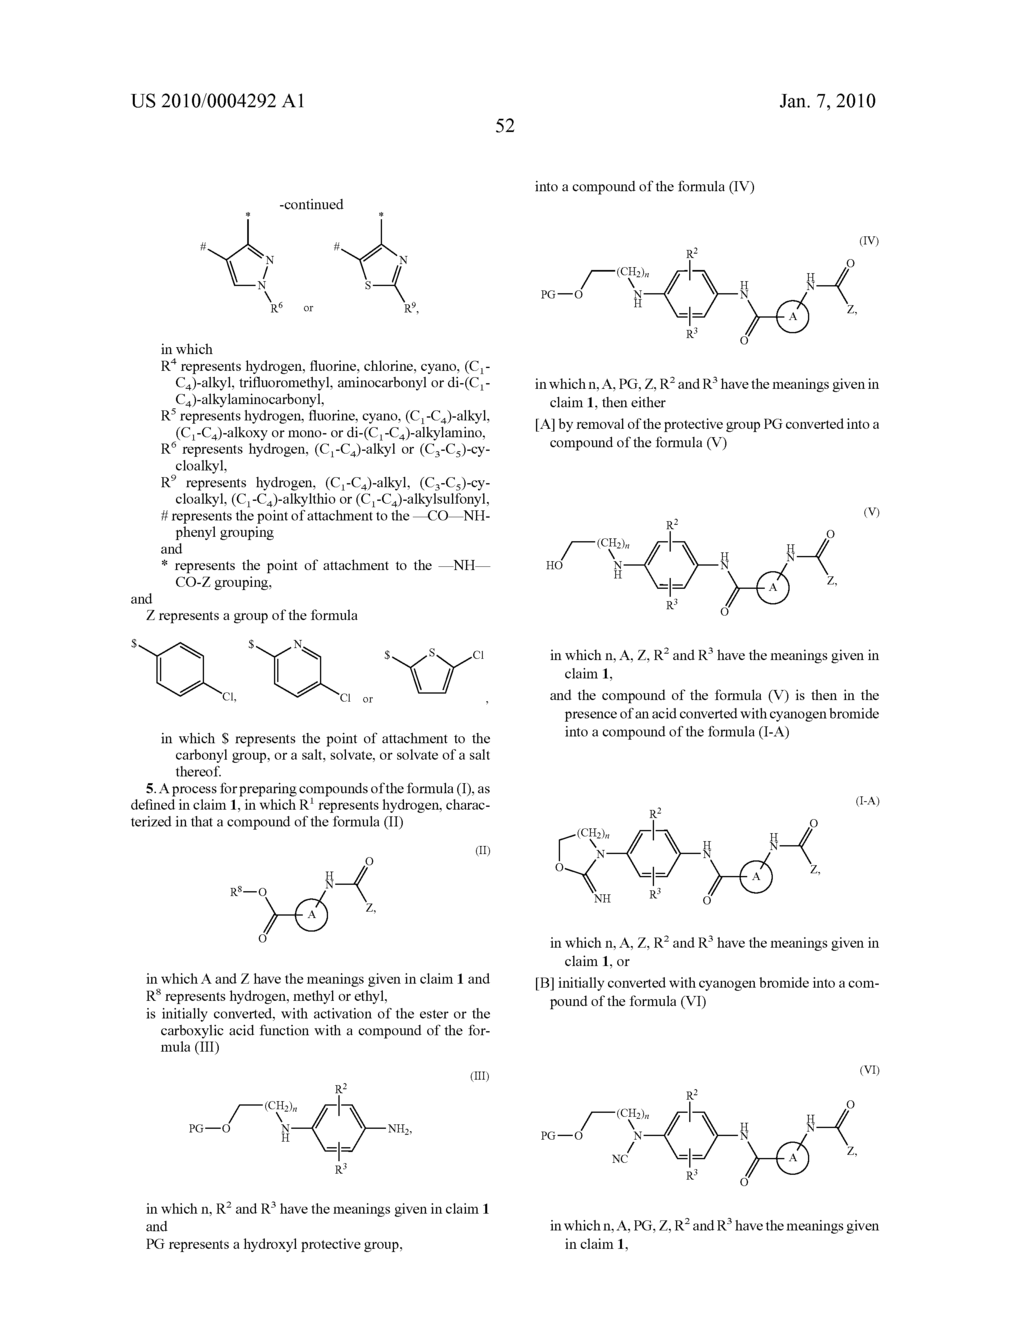 Iminooxazolidine Derivatives and Their Use - diagram, schematic, and image 53